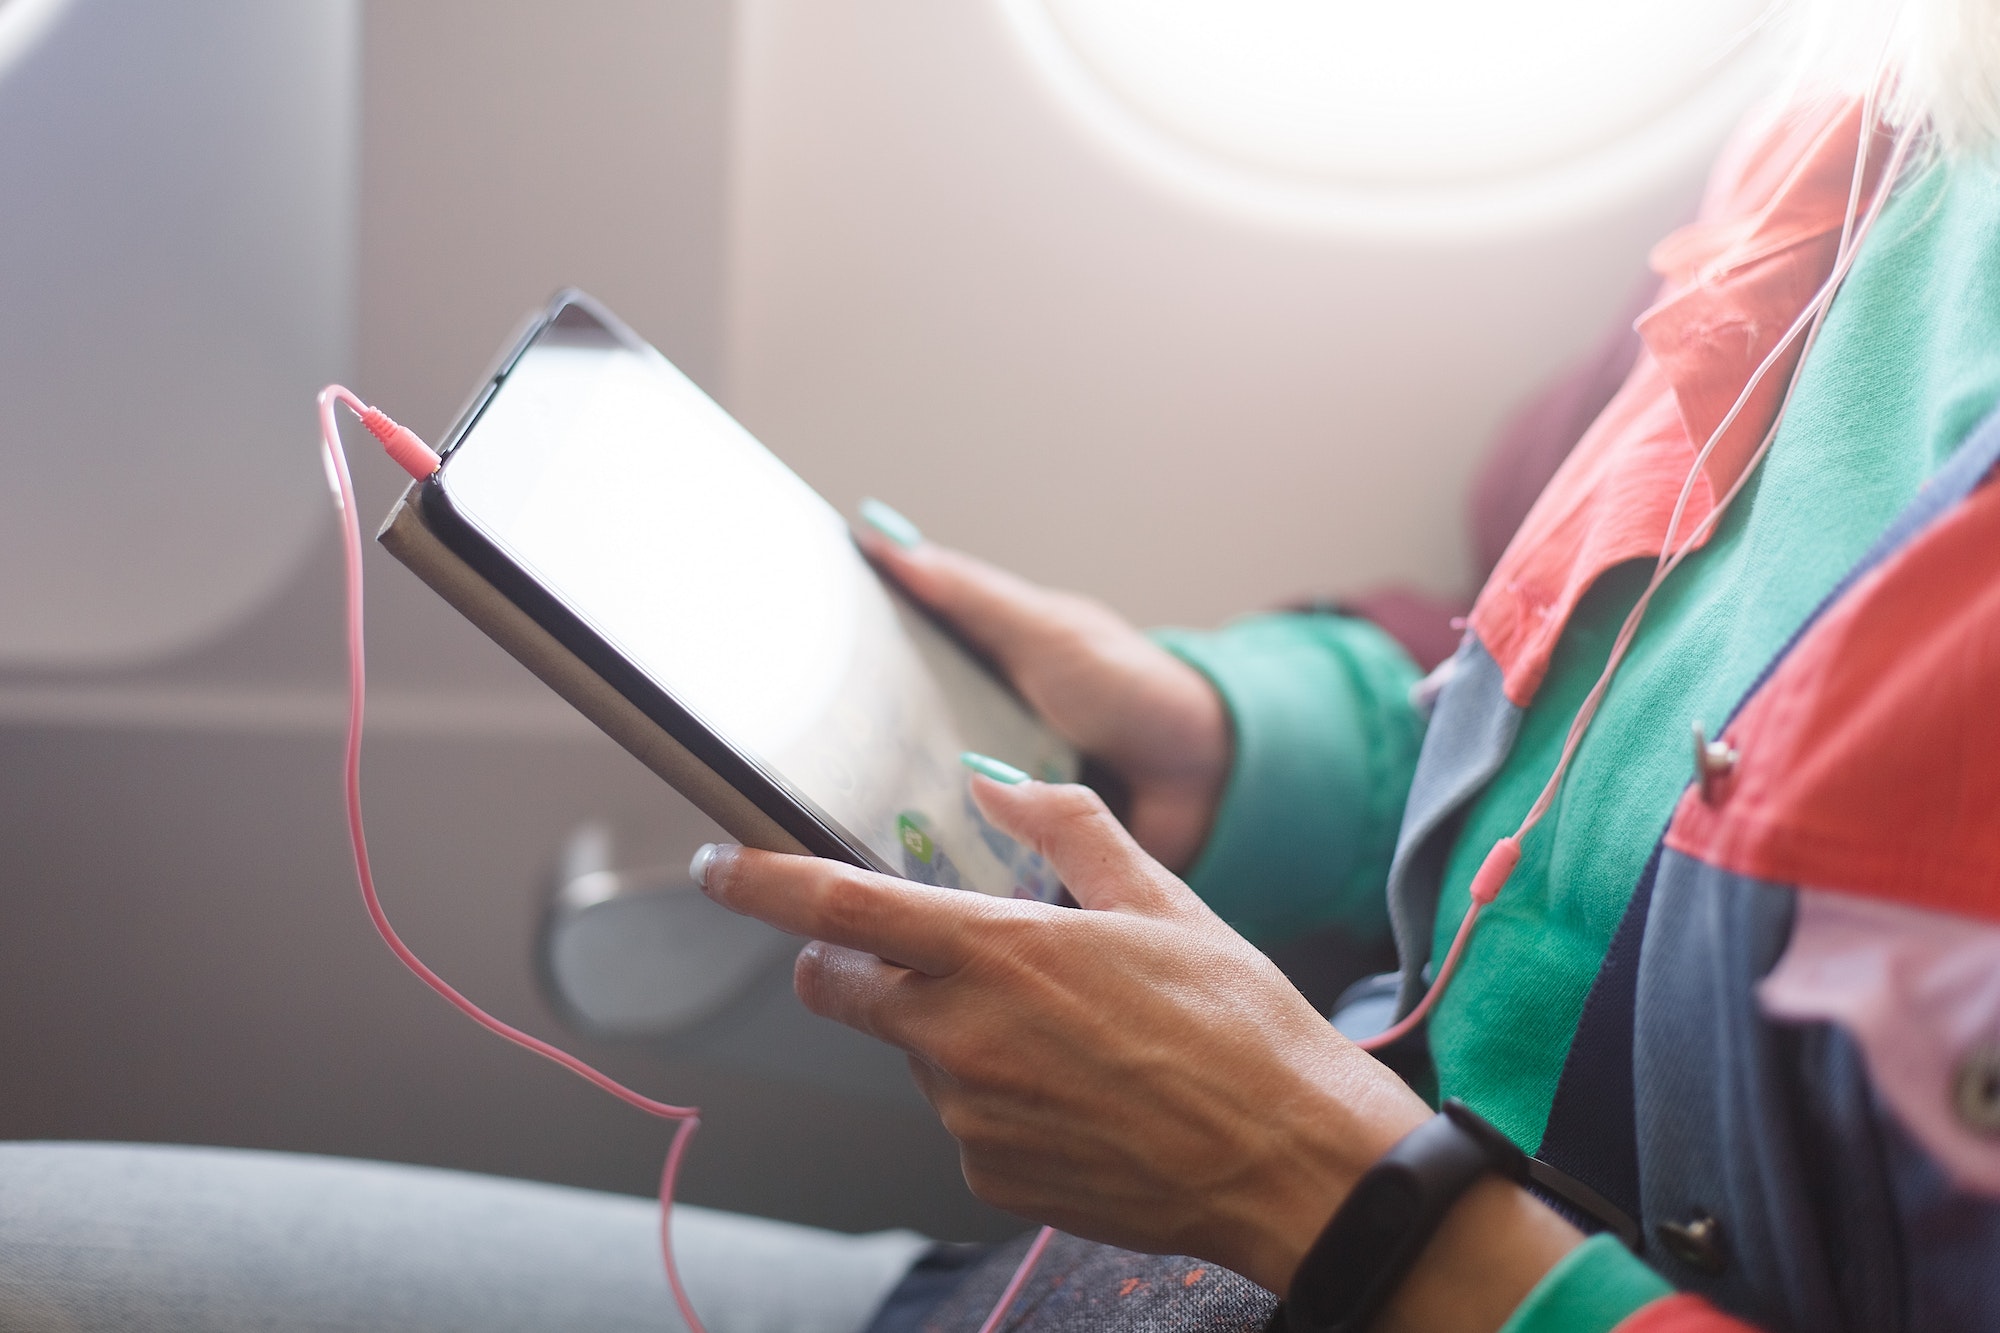 A young woman uses a tablet on the plane. Reading an e-book while traveling. Airplane passenger.